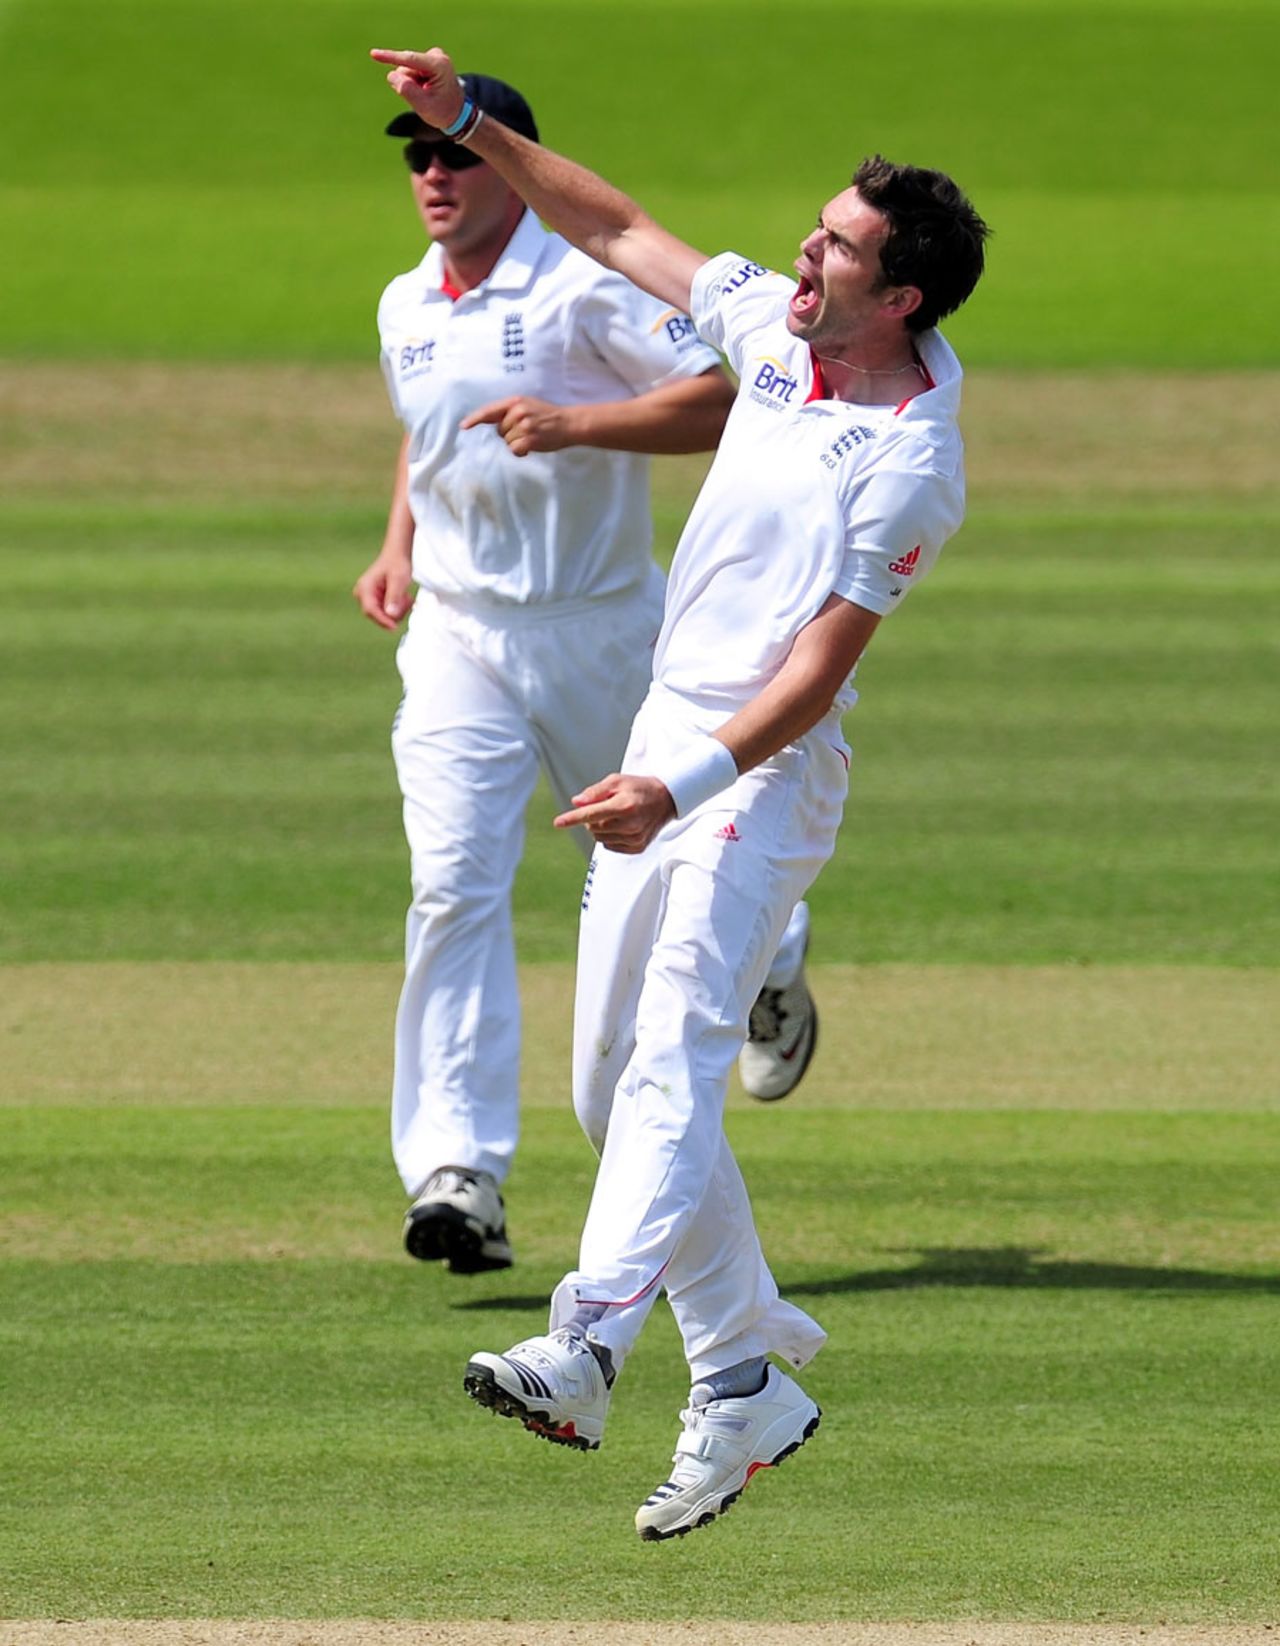 James Anderson is overjoyed after removing Sachin Tendulkar, England v India, 1st Test, Lord's, 5th day, July 25, 2011